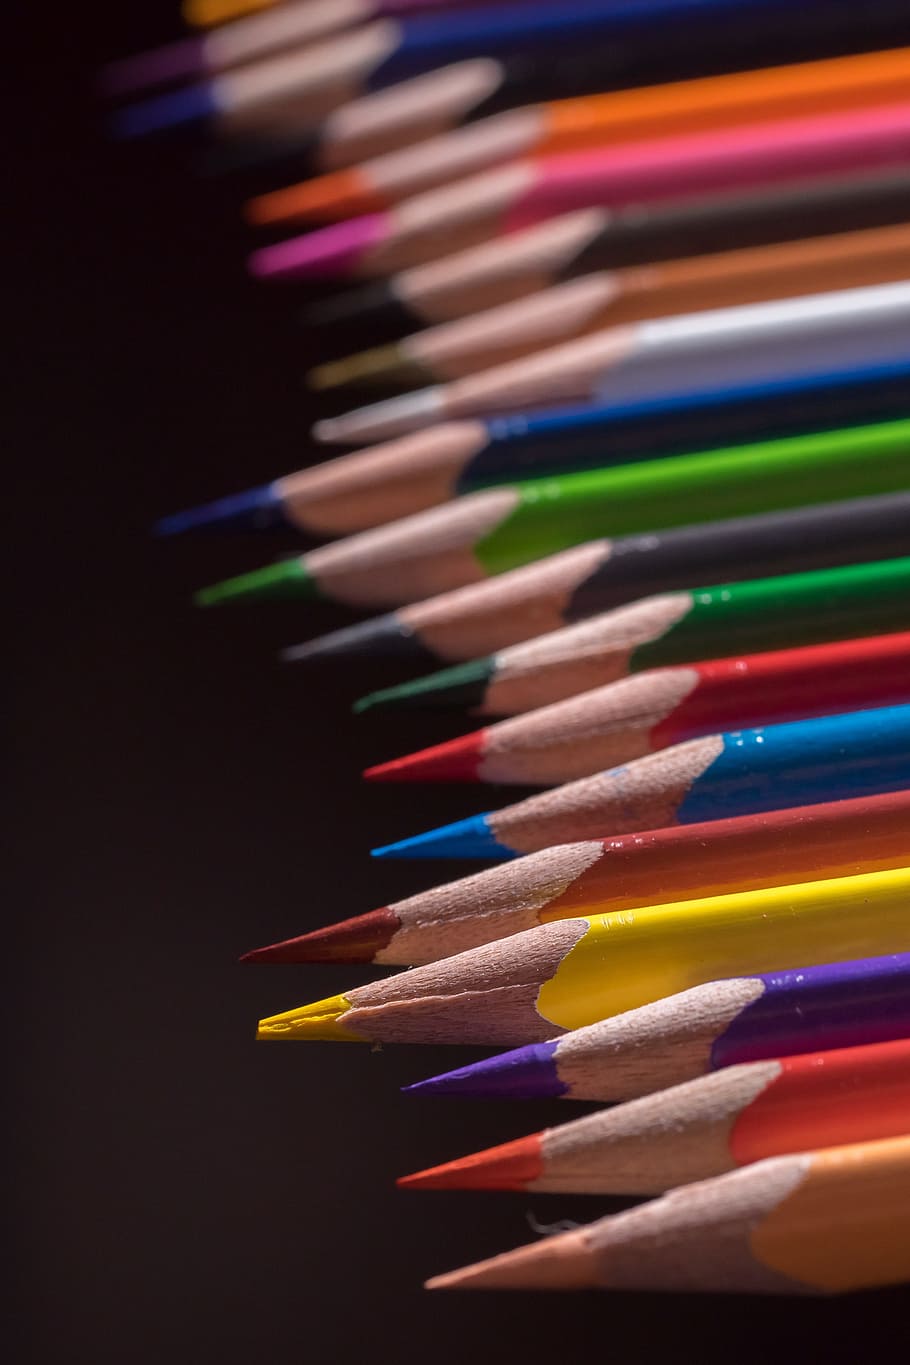 colored pencils, wooden pegs, pens, colorful, paint, school